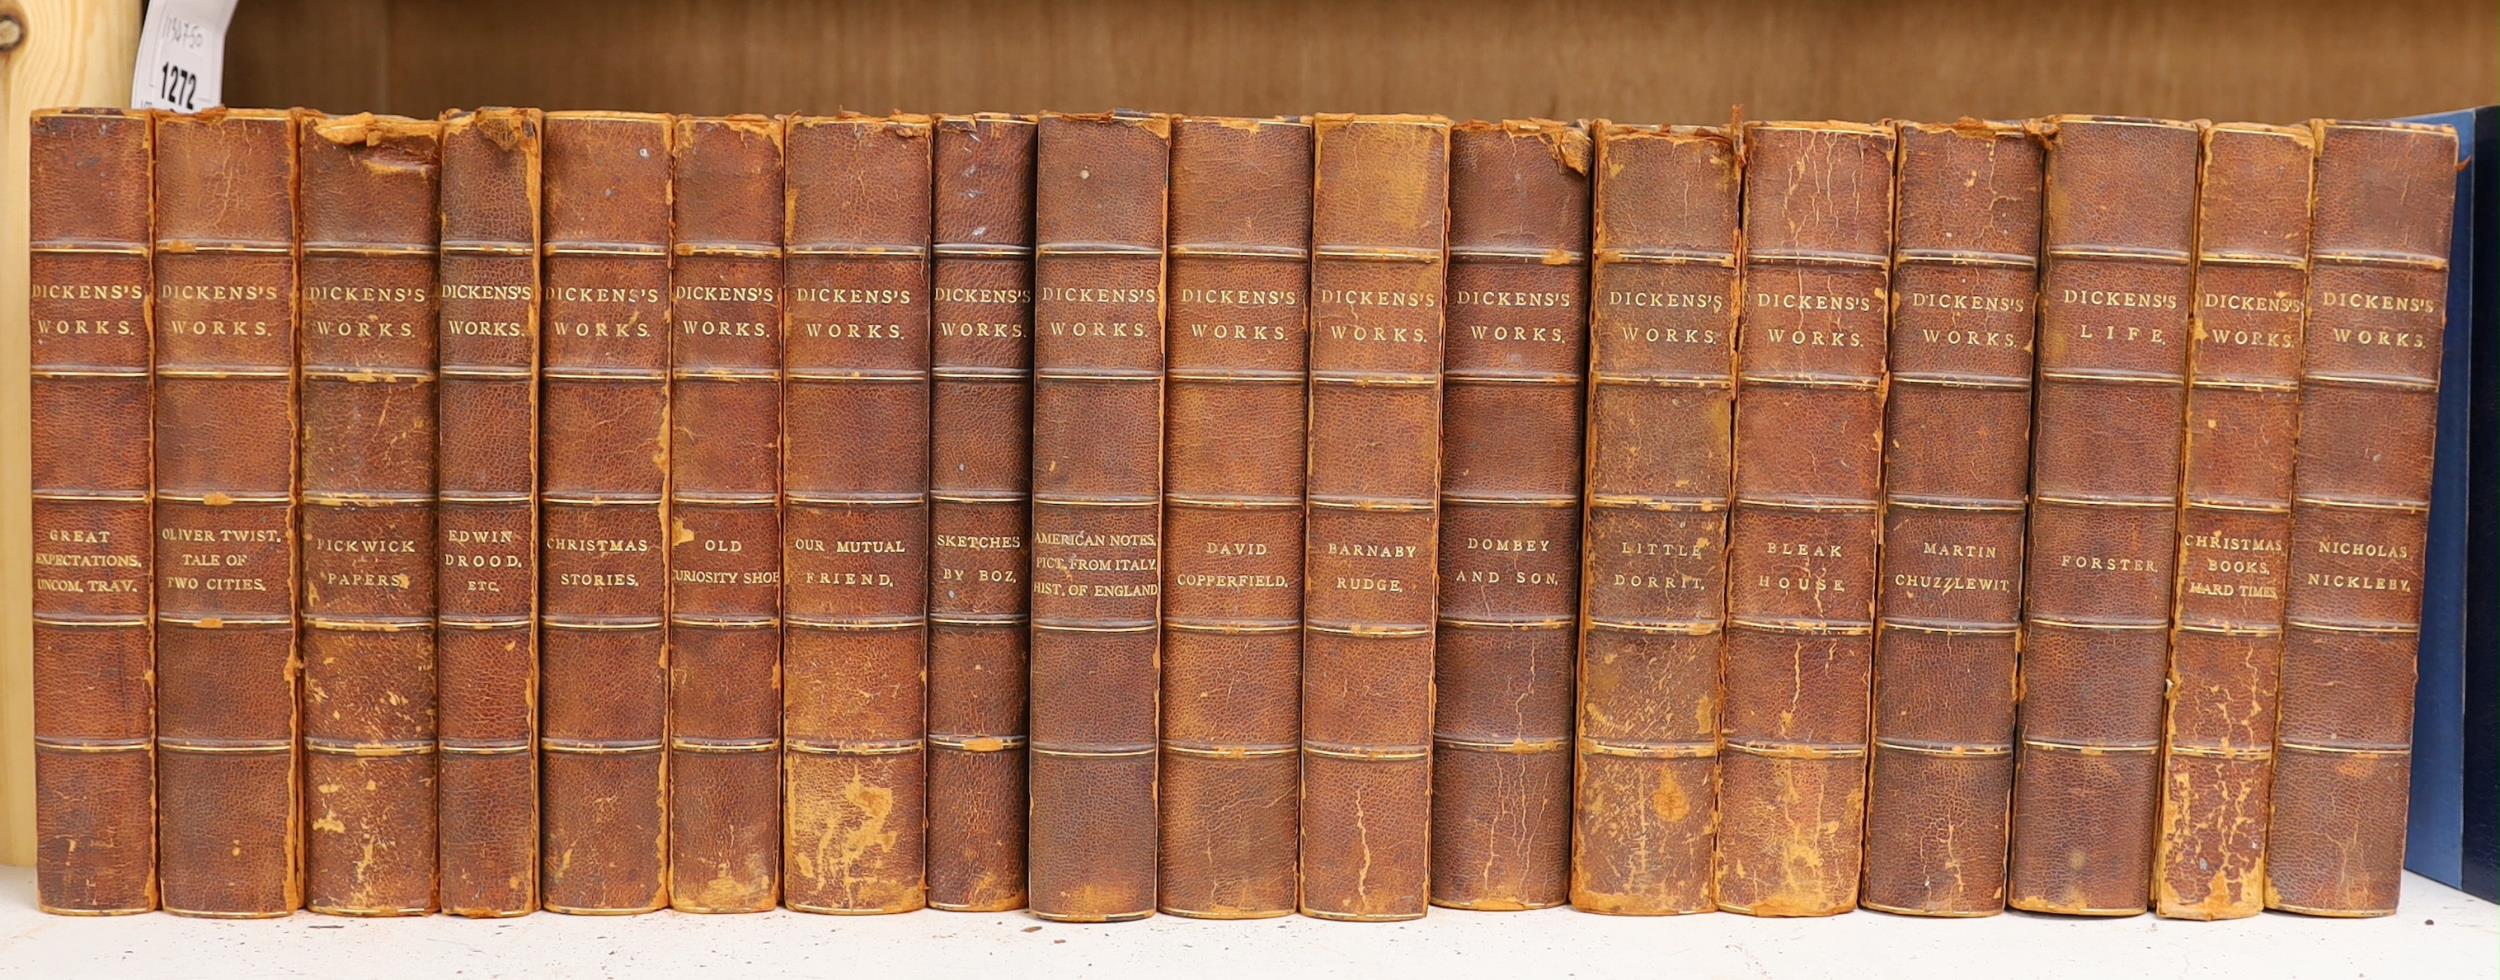 ° ° Dickens, Charles - The Works, 18 vols, 8vo, half red morocco, Chapman Hall, London, nd.